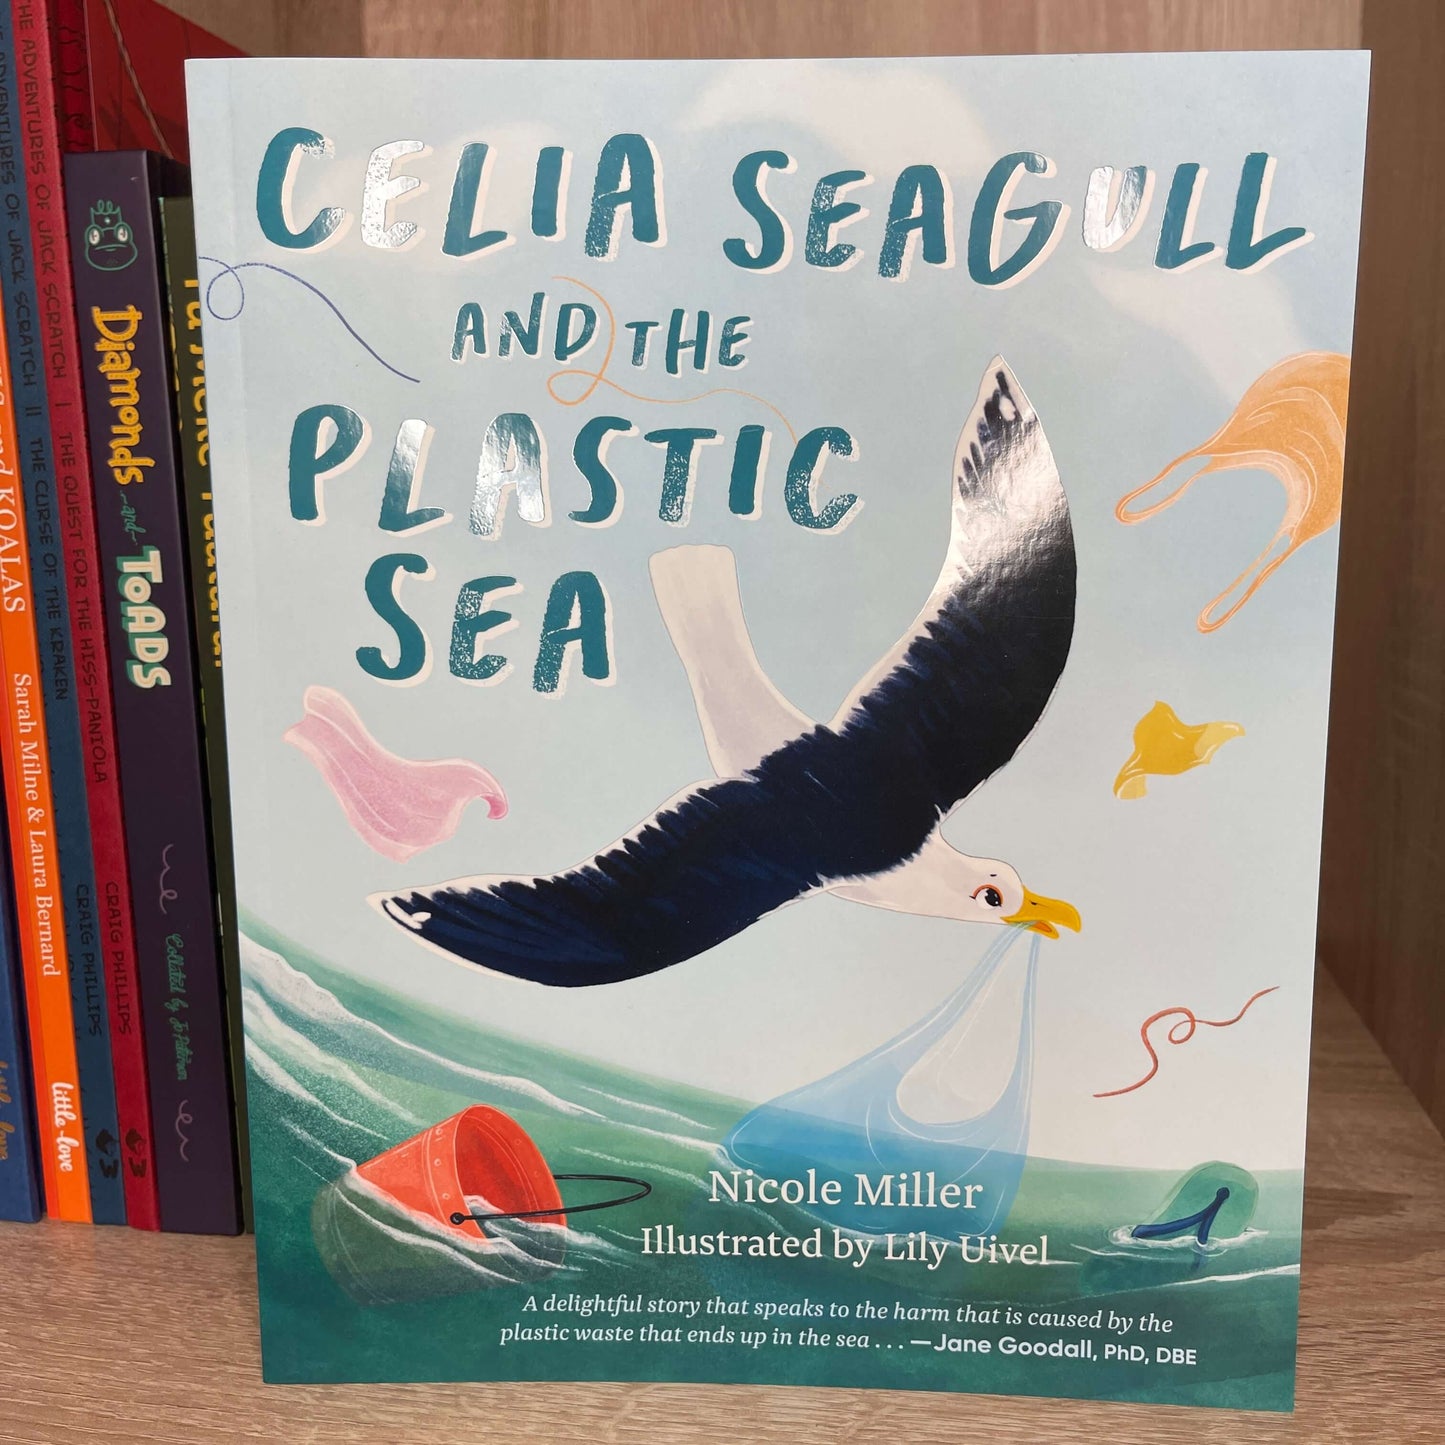 Childrens book Celia Seagull and the Plastic Sea by Nicole Miller